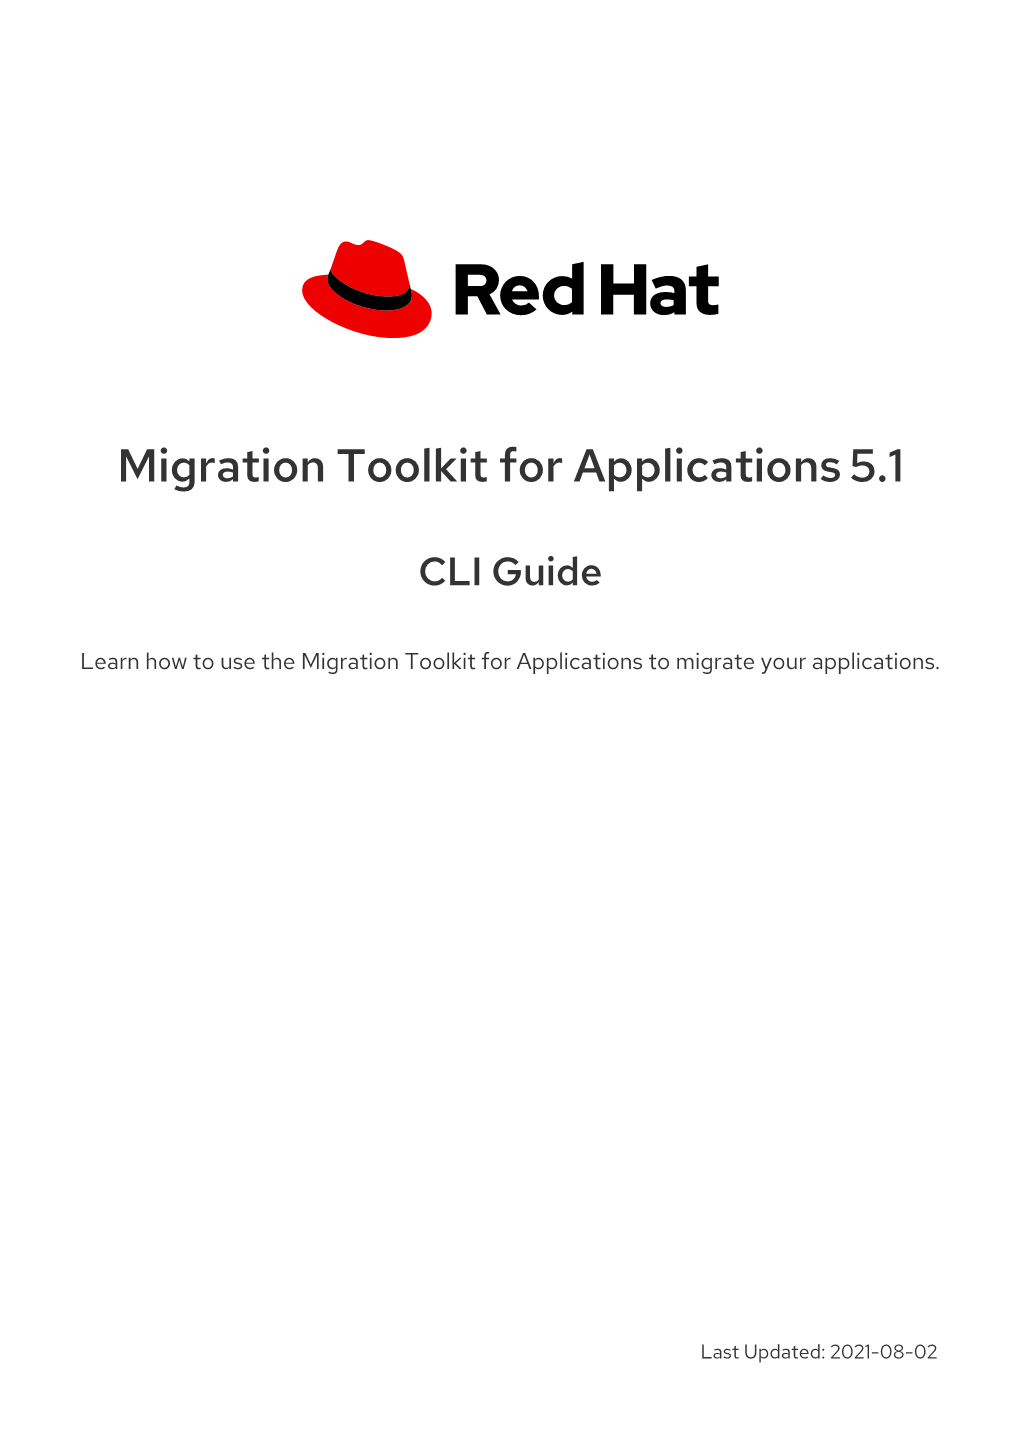 Migration Toolkit for Applications 5.1 CLI Guide